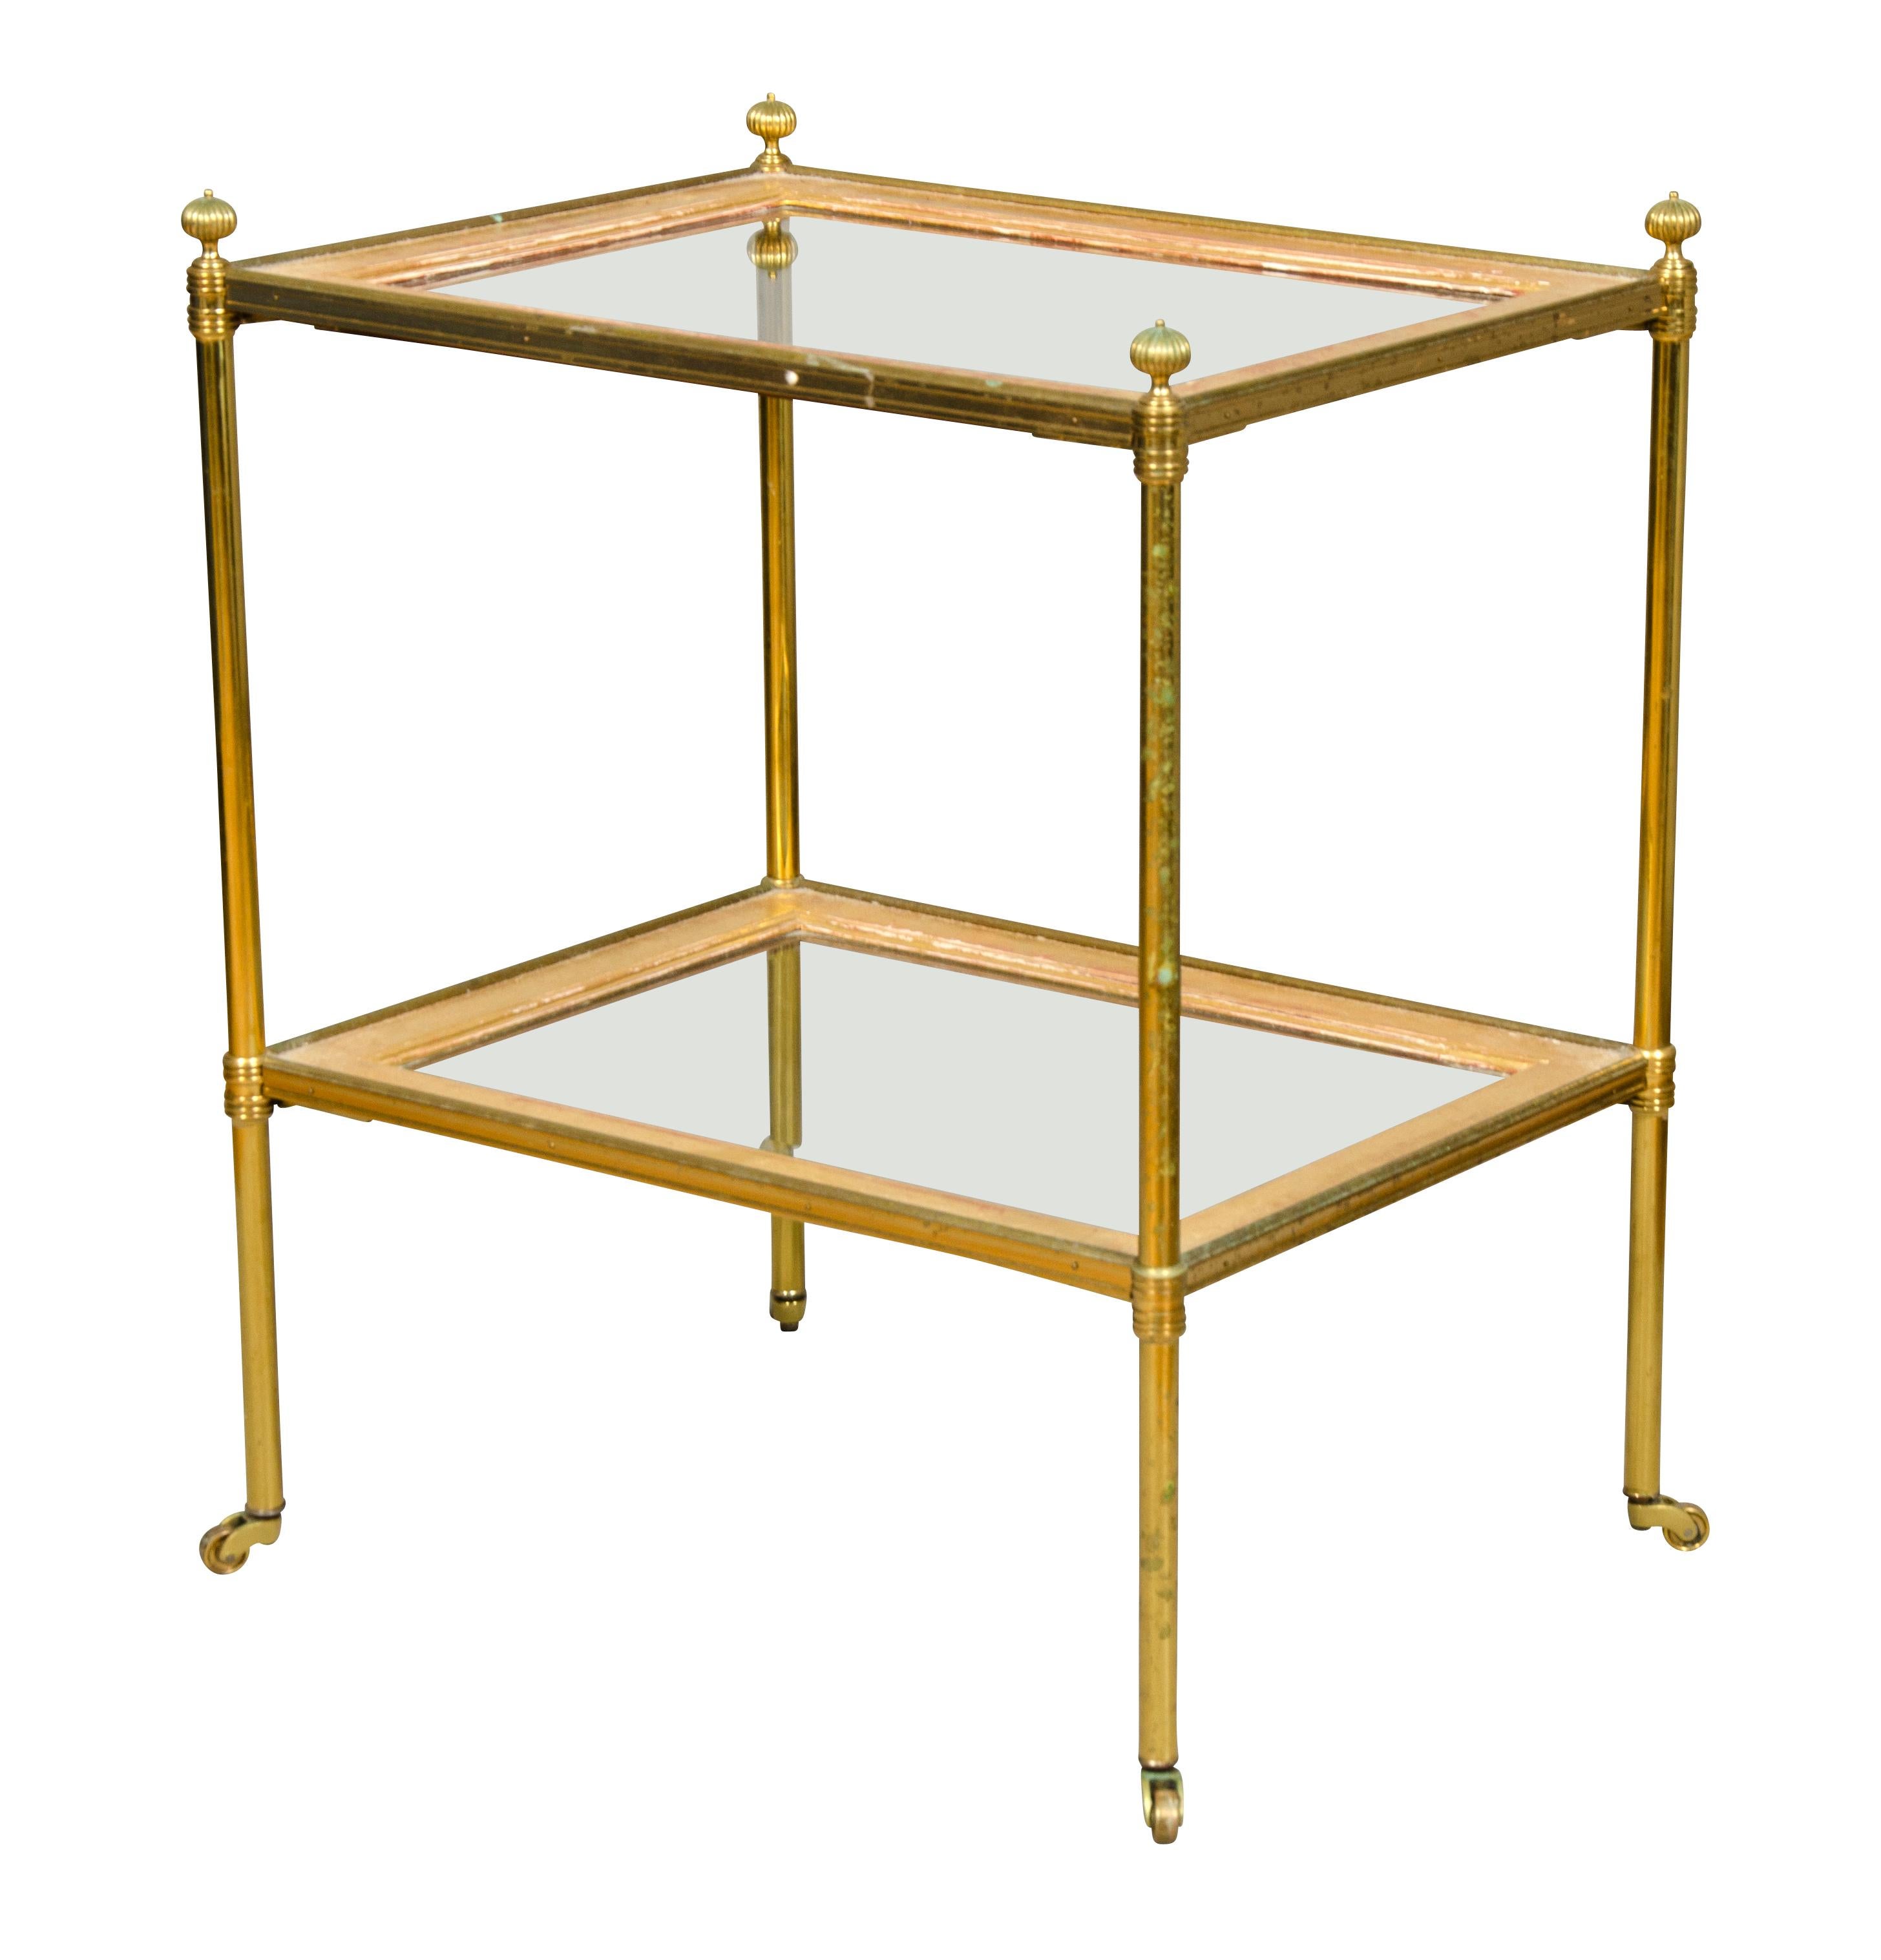 Mid-20th Century Edwardian Style Brass and Glass Table